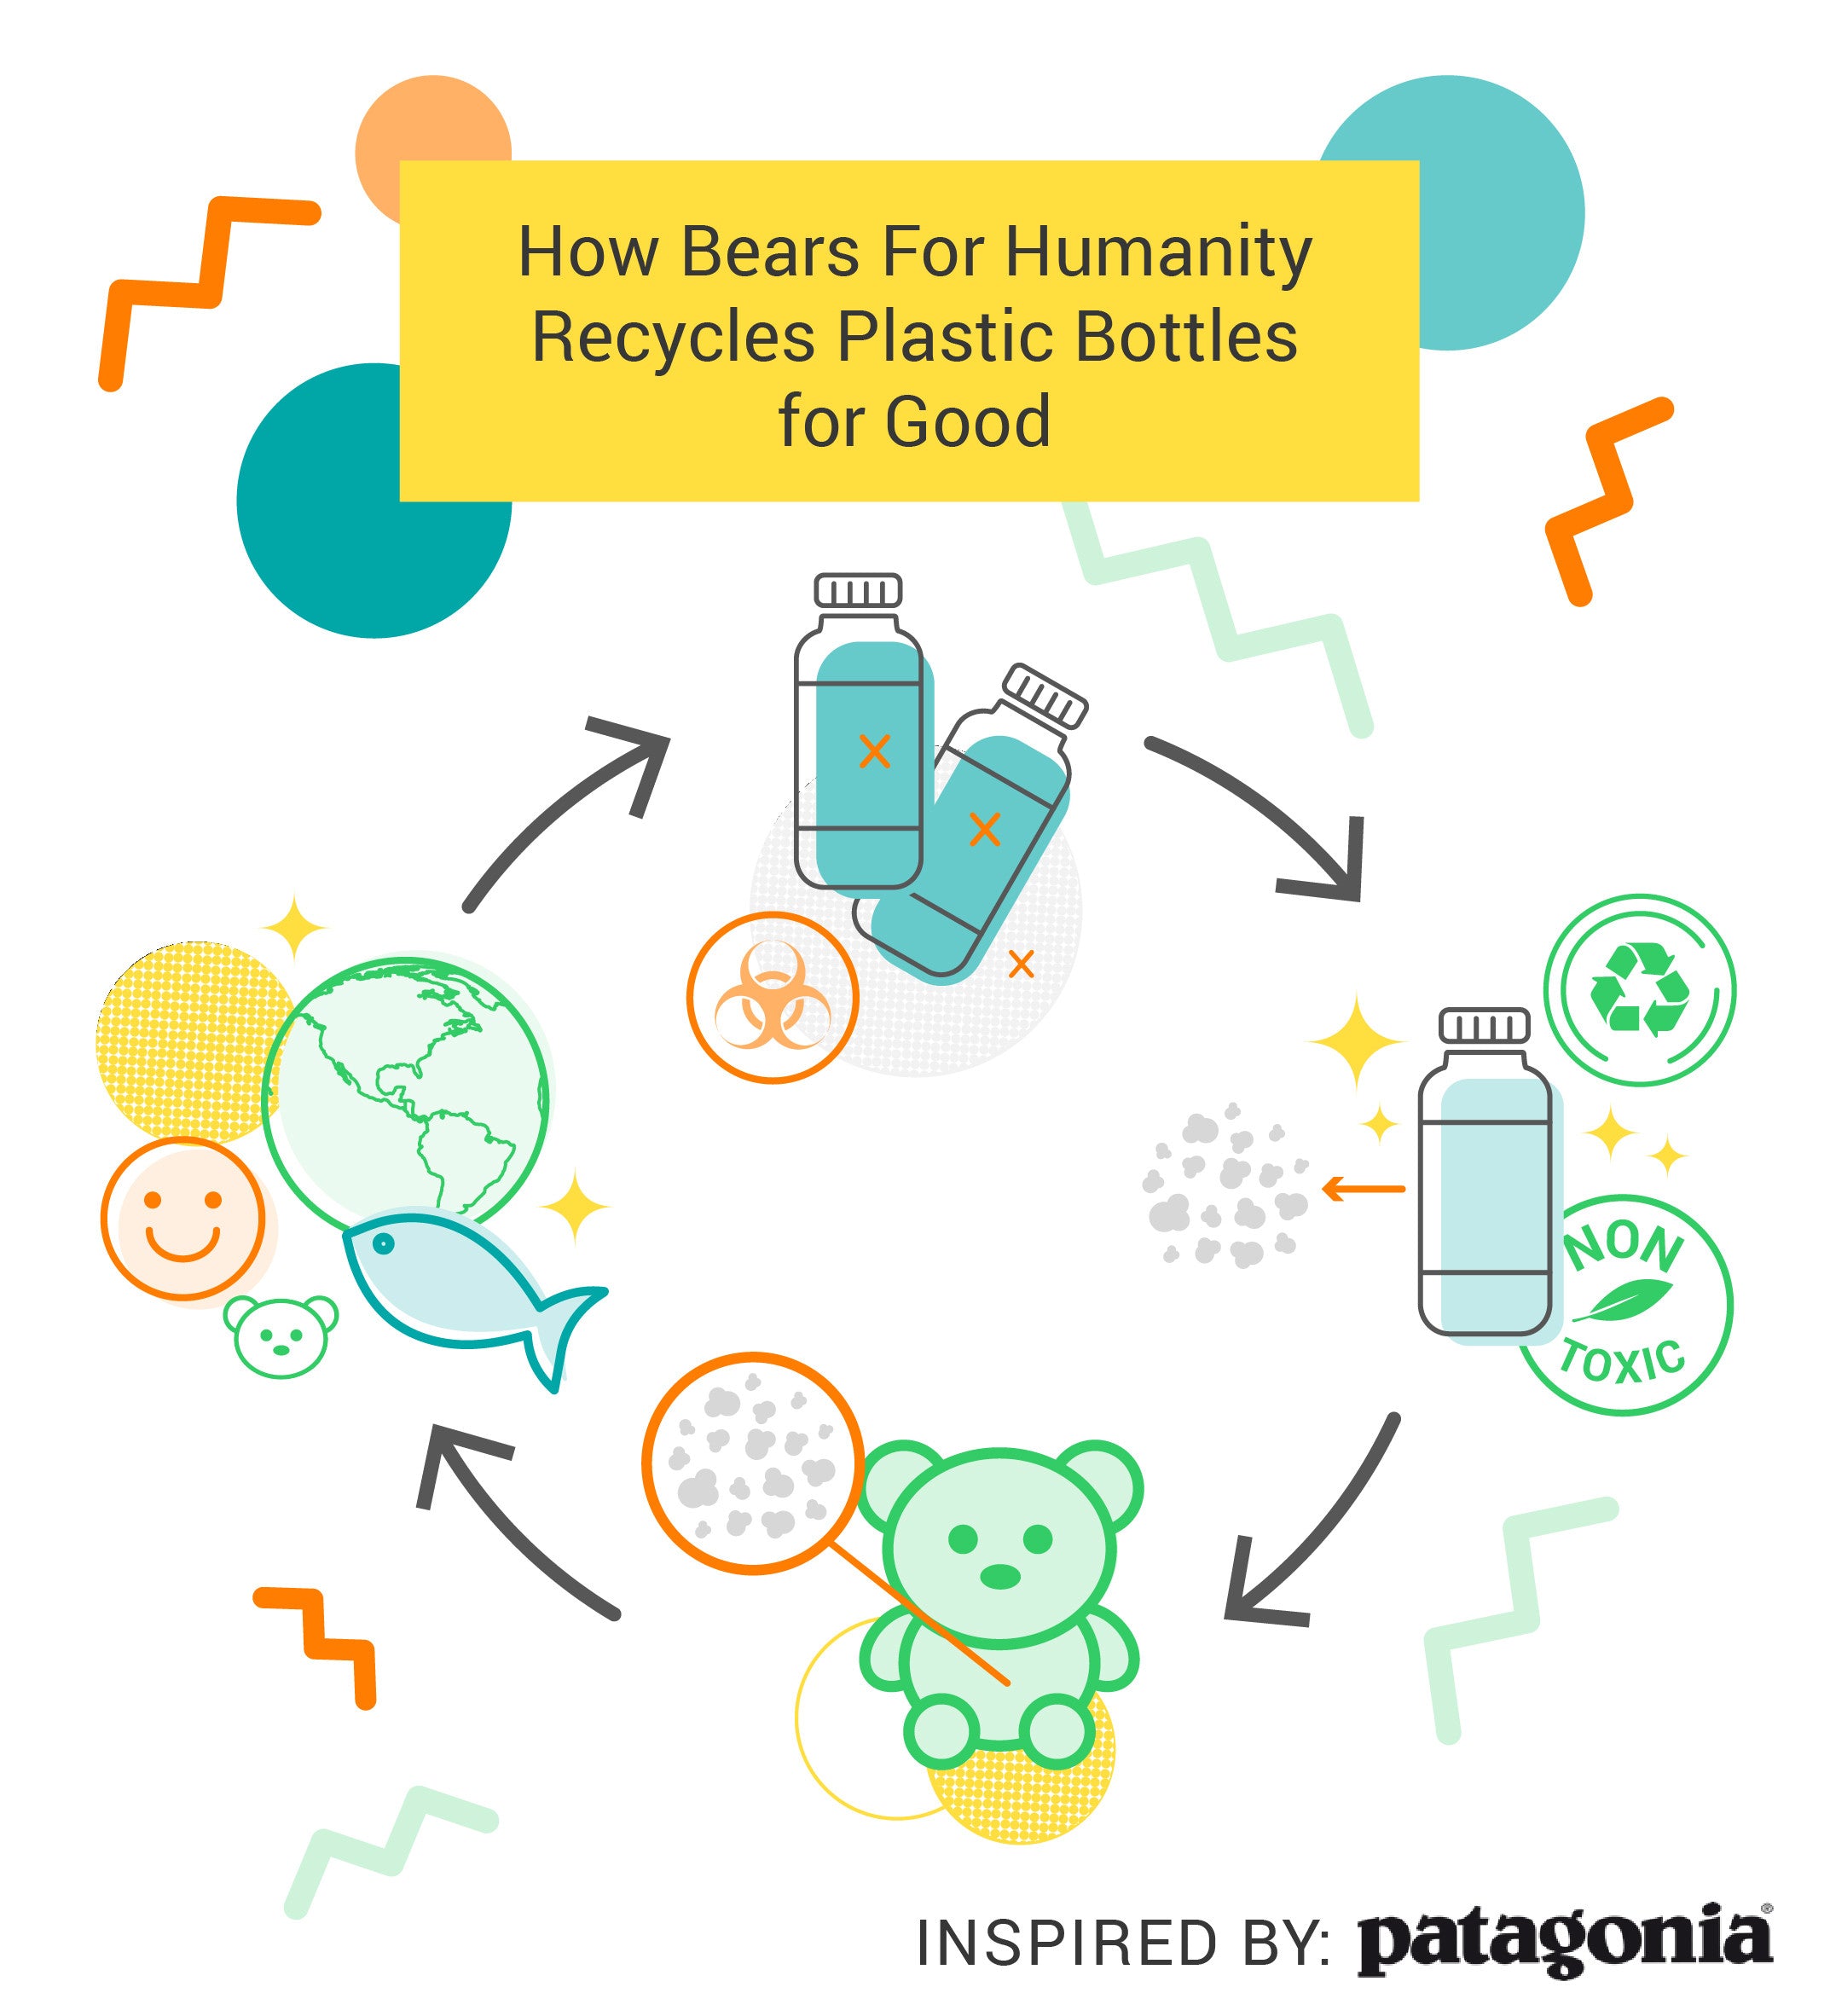 How Bears For Humanity Recycles Plastics Bottles for Good